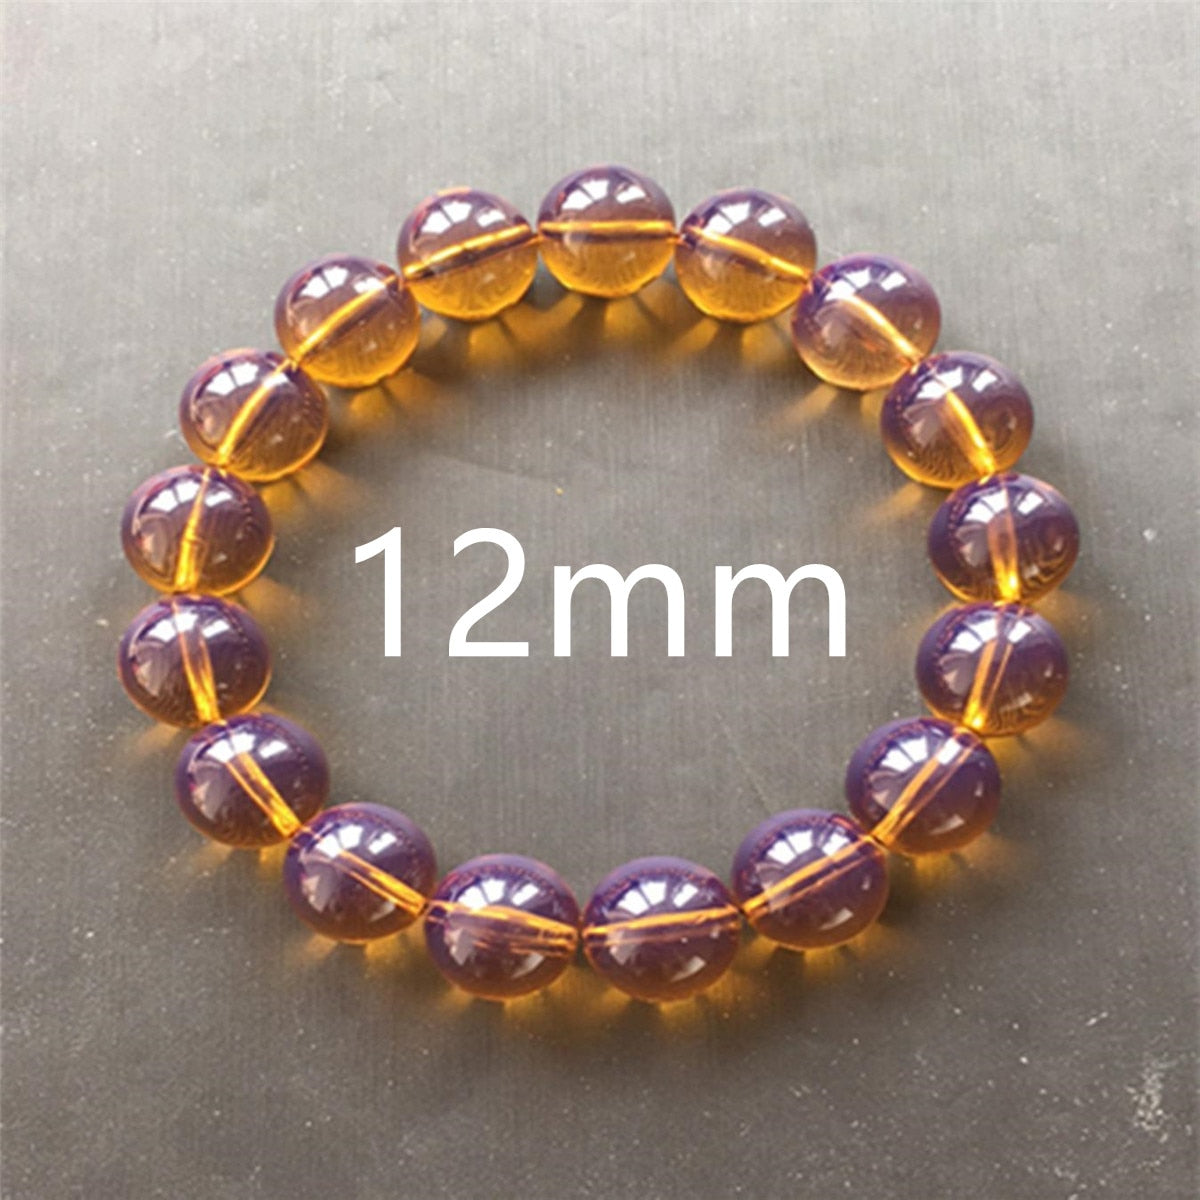 Genuine Natural Yellow Amber Blue Dominican Round Beads Bracelet Women Men Amber Healing 12mm 10mm 8mm Stretch Jewelry AAAAA 12mm